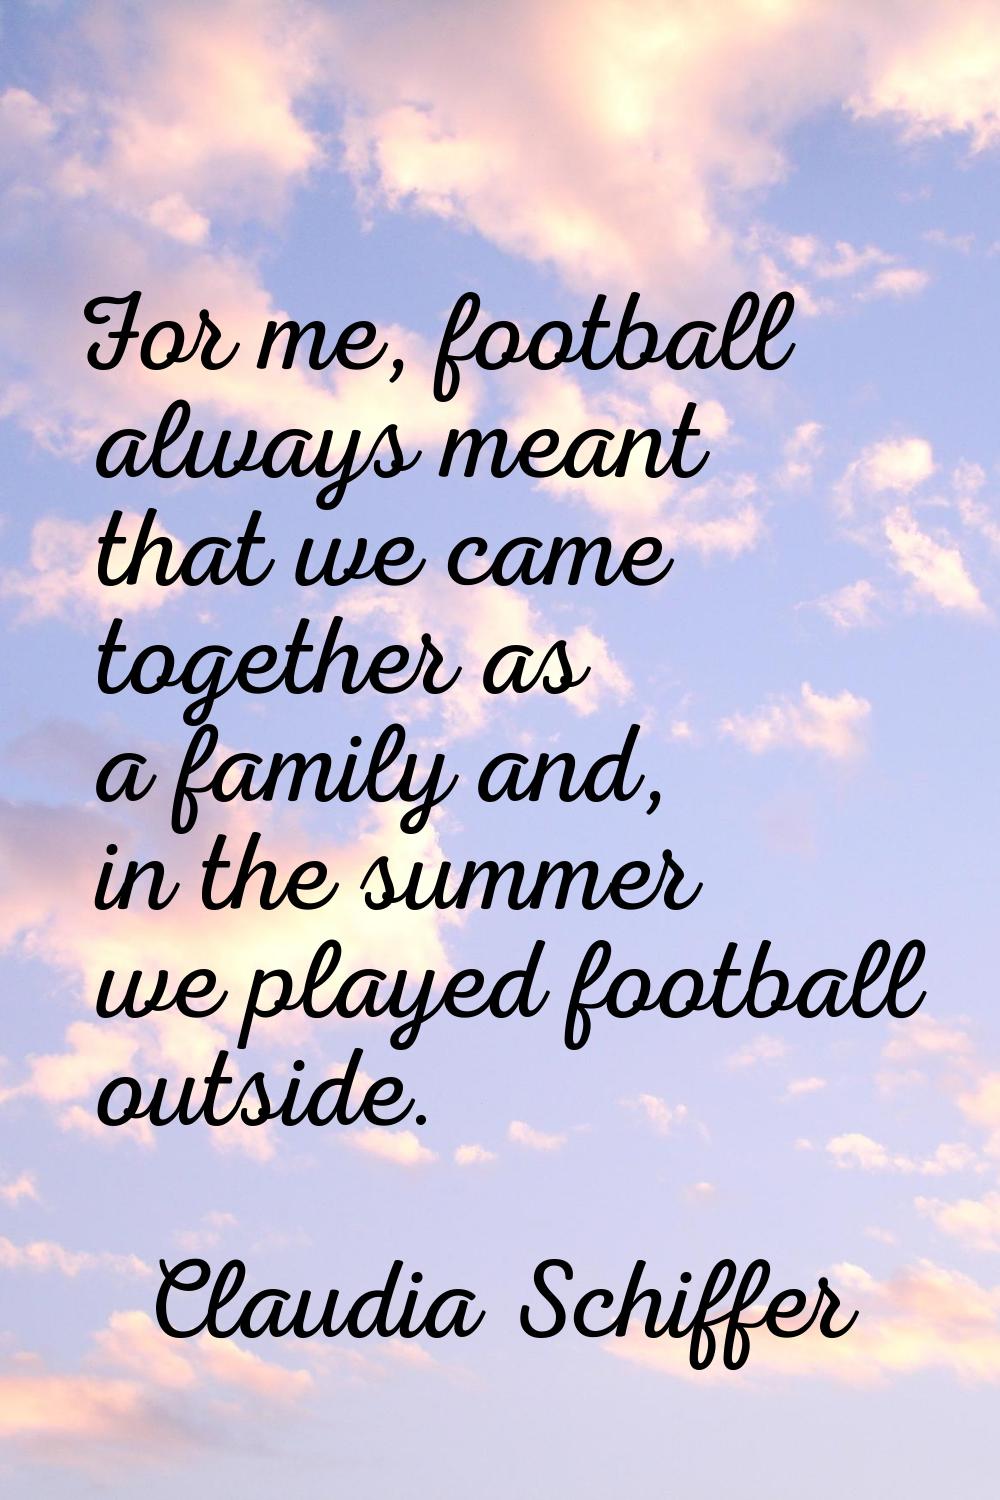 For me, football always meant that we came together as a family and, in the summer we played footba